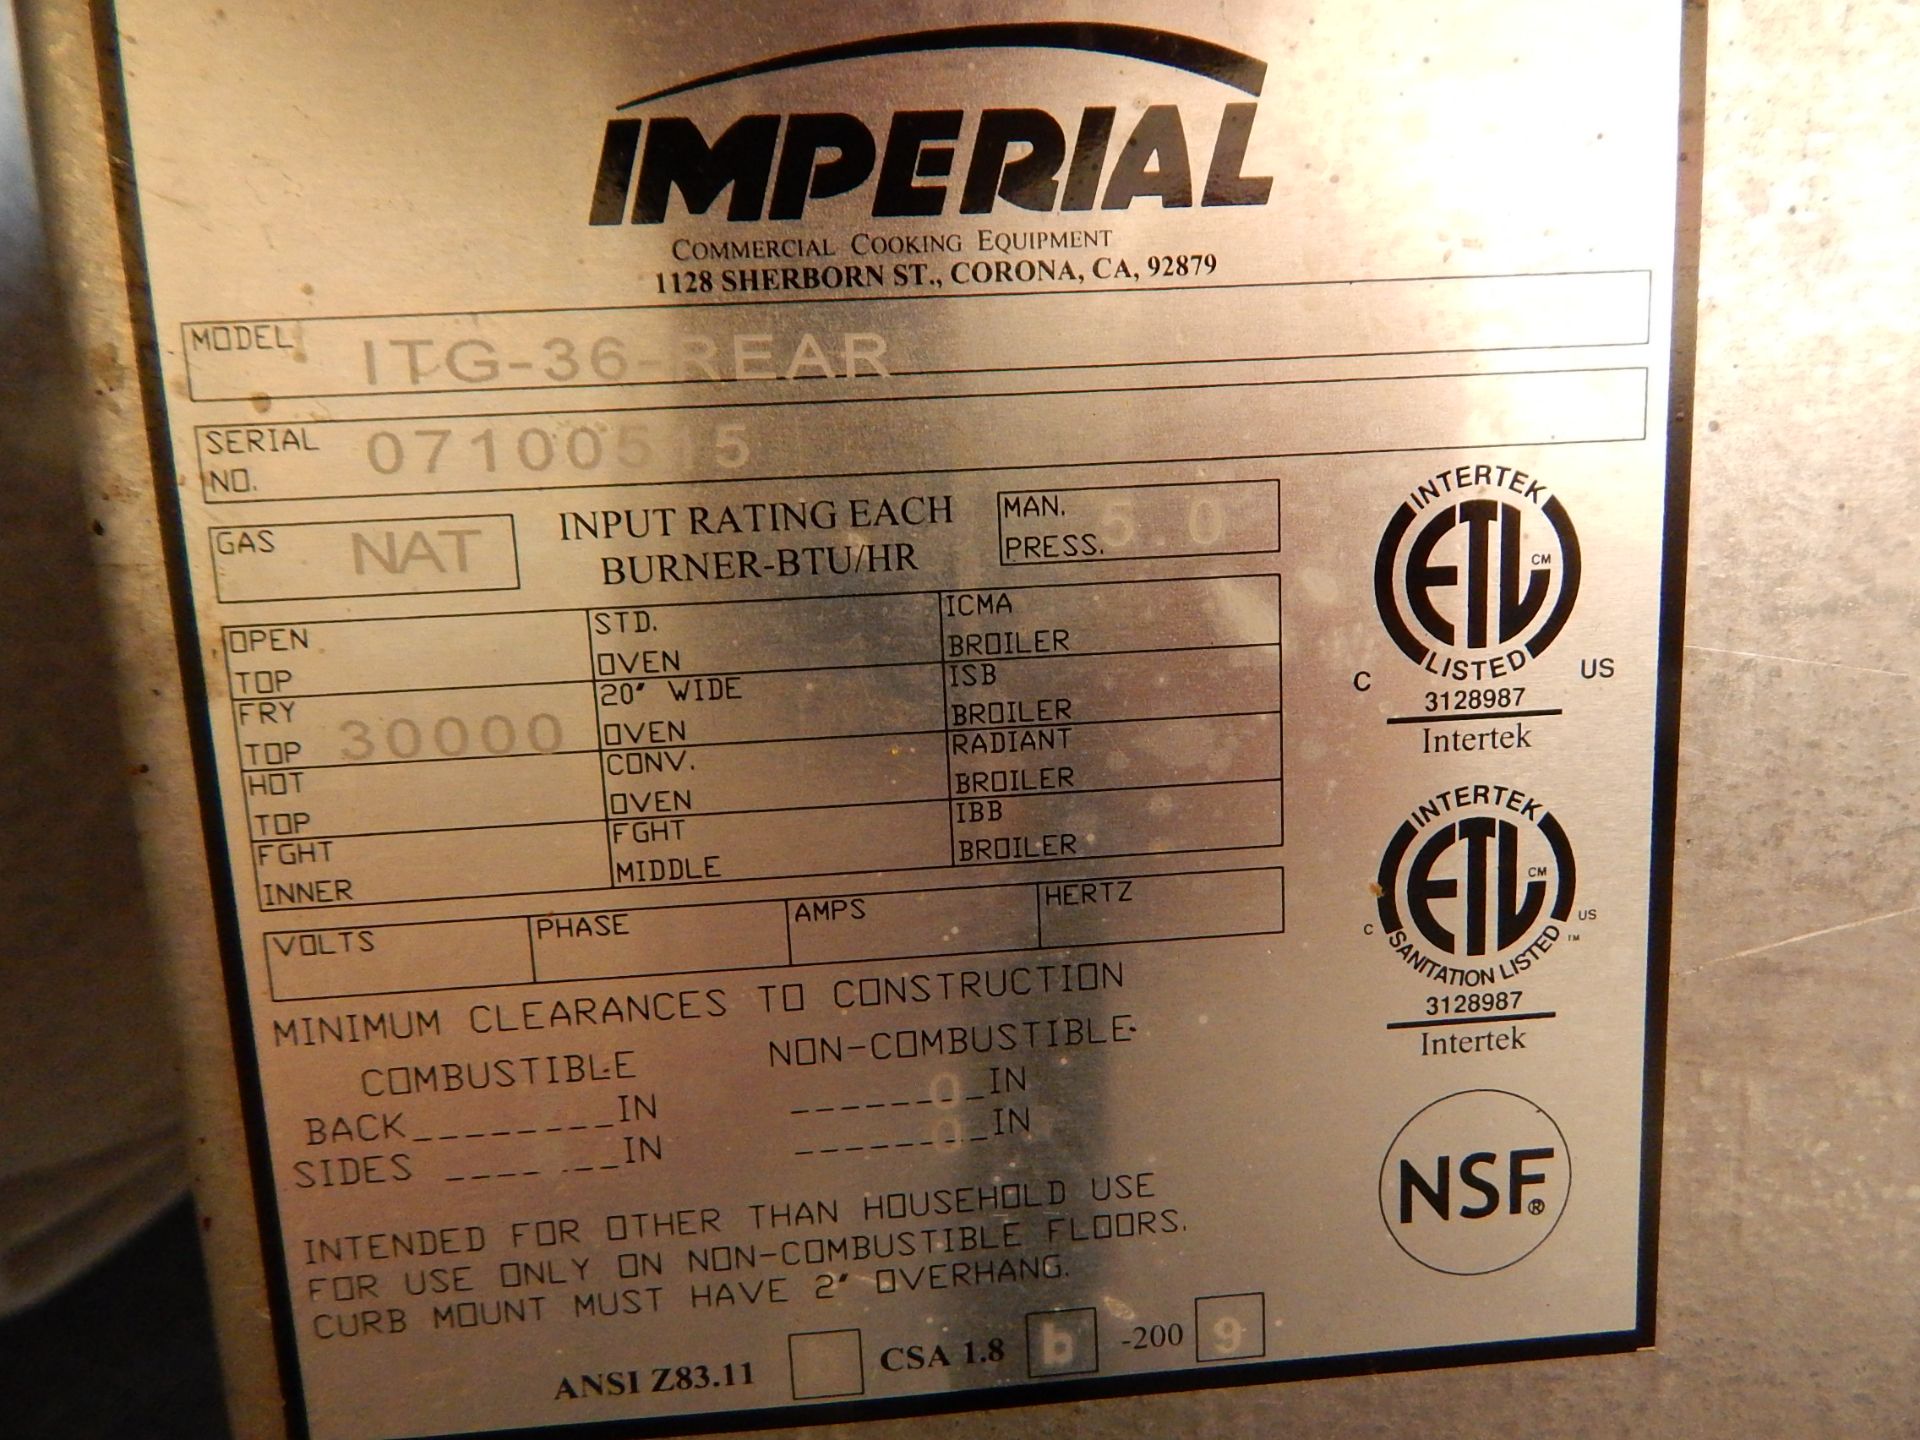 Imperial Model ITG-36-REAR 36" Flat Top Gas Griddle, SN 07100515 - Image 6 of 7